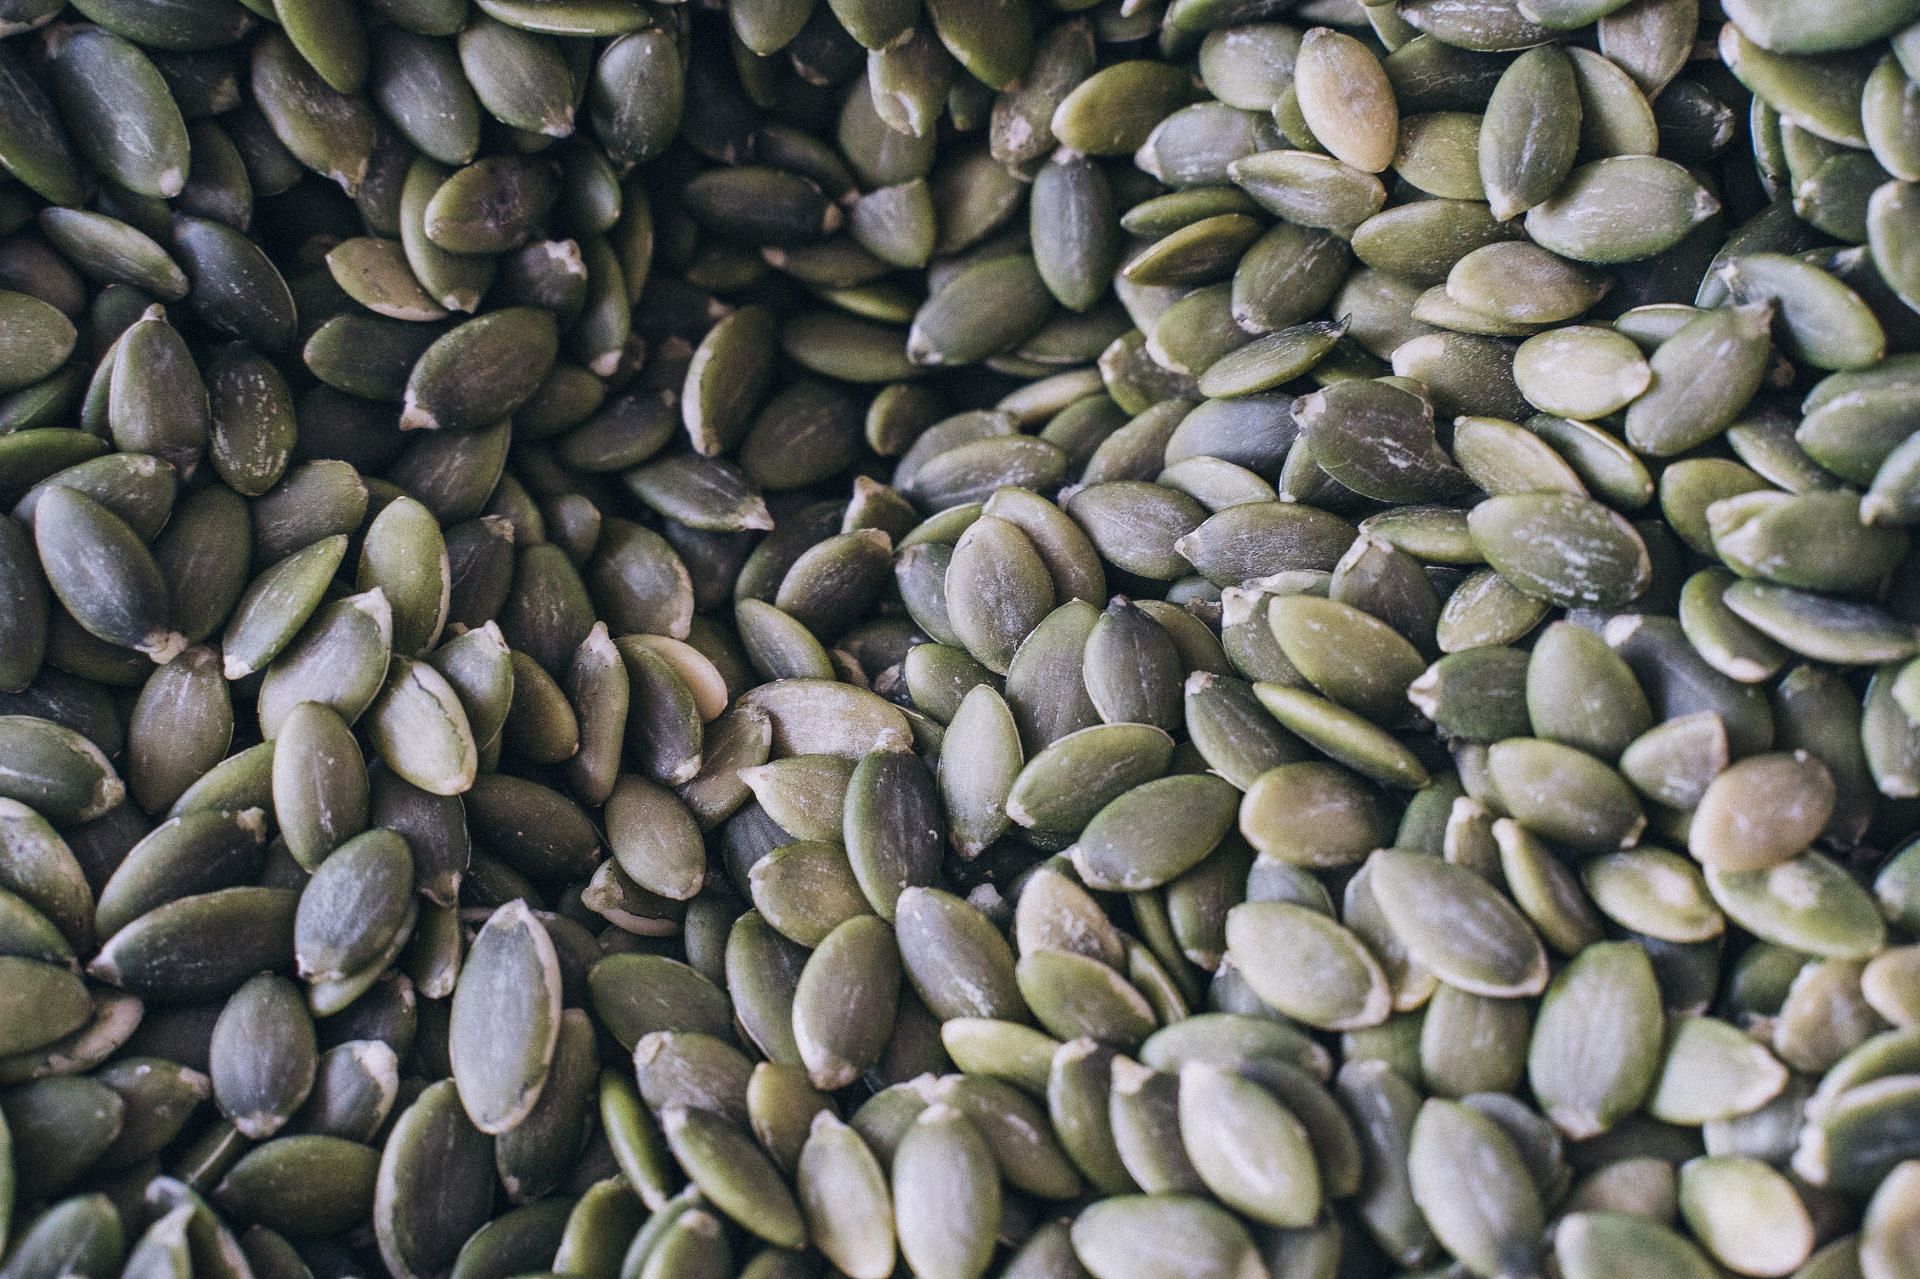 Pumpkin seeds are used as a natural remedy for high blood pressure. (Image via Pexels / Anna Tarazevich)